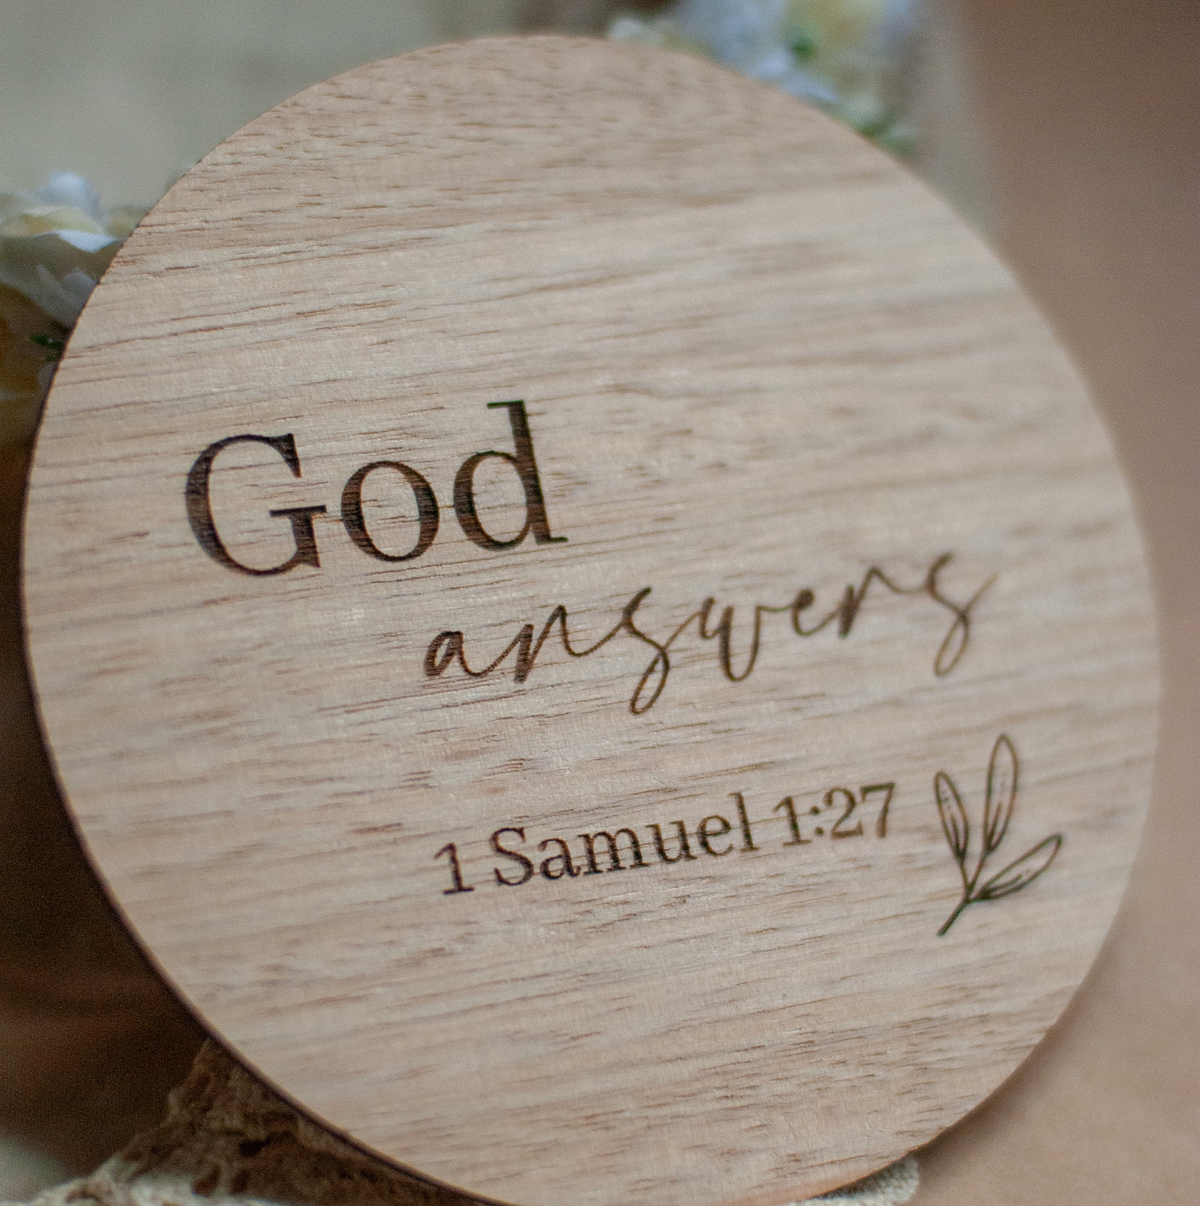 1st Samuel 1:17 bible quote etched onto a timber milestone disck t for Christioan mothers to use in their pregnancy or birth announcement photos